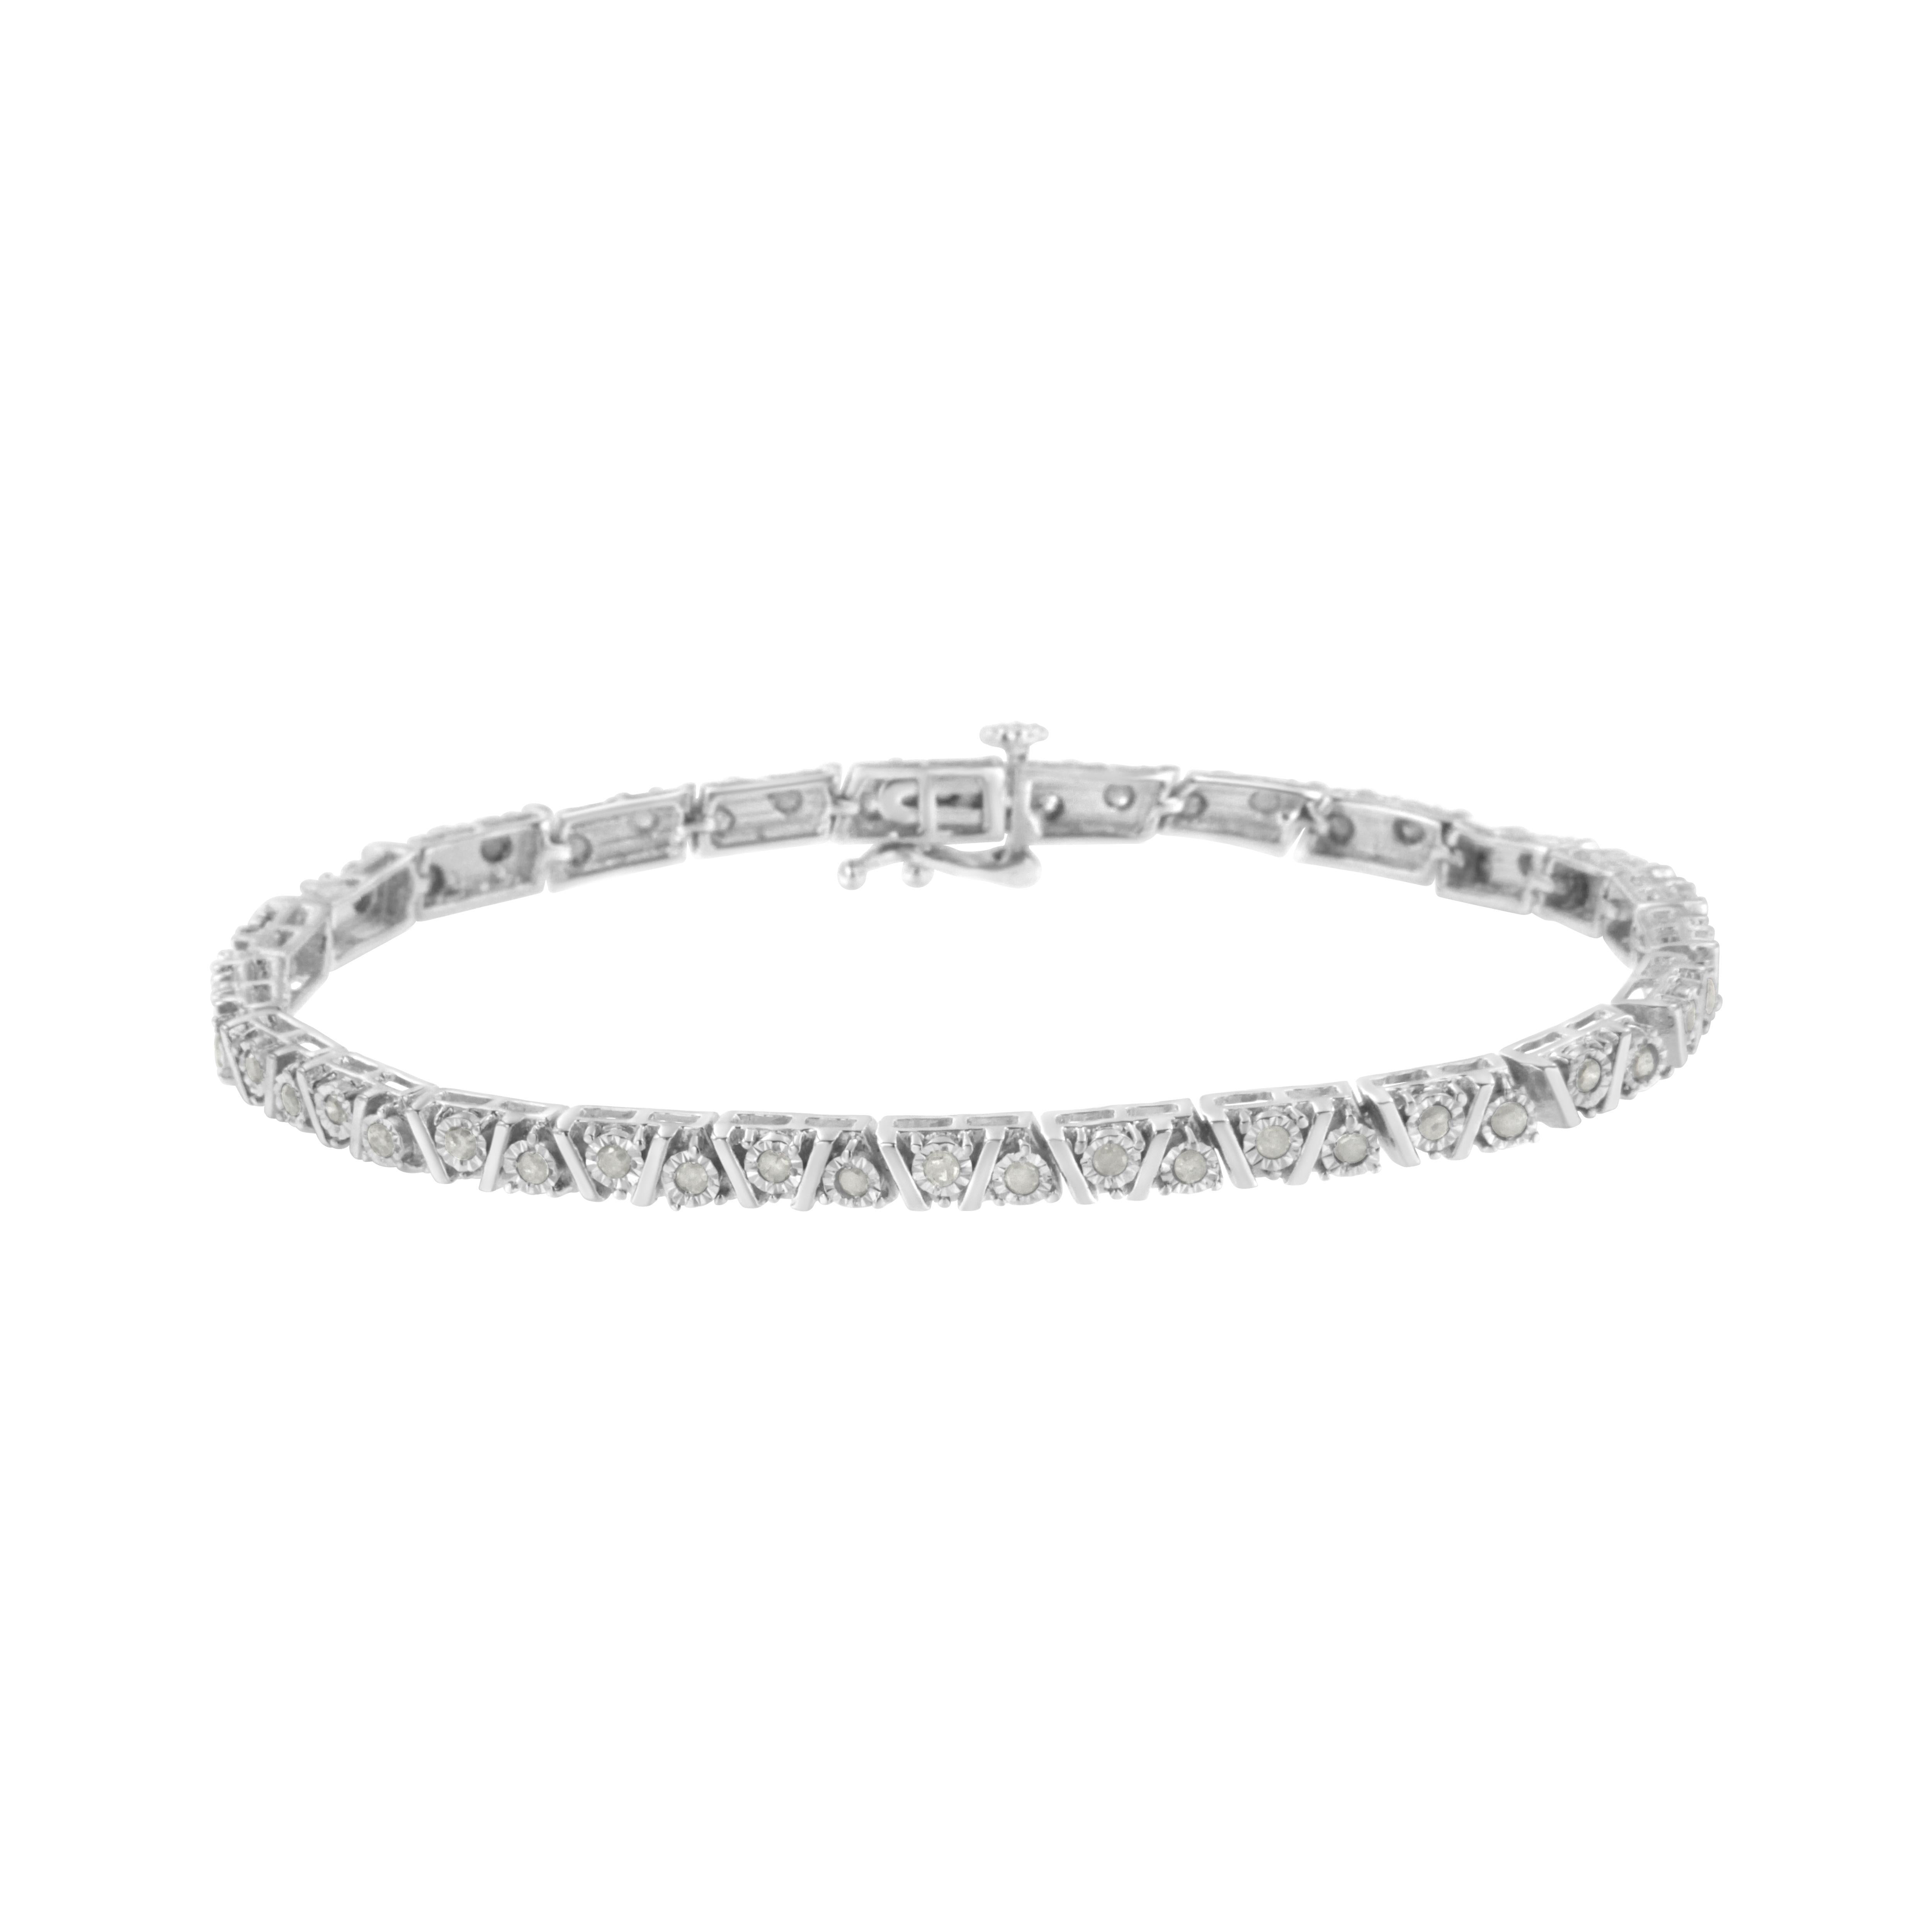 This lovely sterling silver bracelet shines with 1 carat TDW of diamonds and secures with a box with clasp. Sterling silver ribbons create a zigzag pattern along the length of the bracelet. Set in between the spaces created by the ribbons, miracle